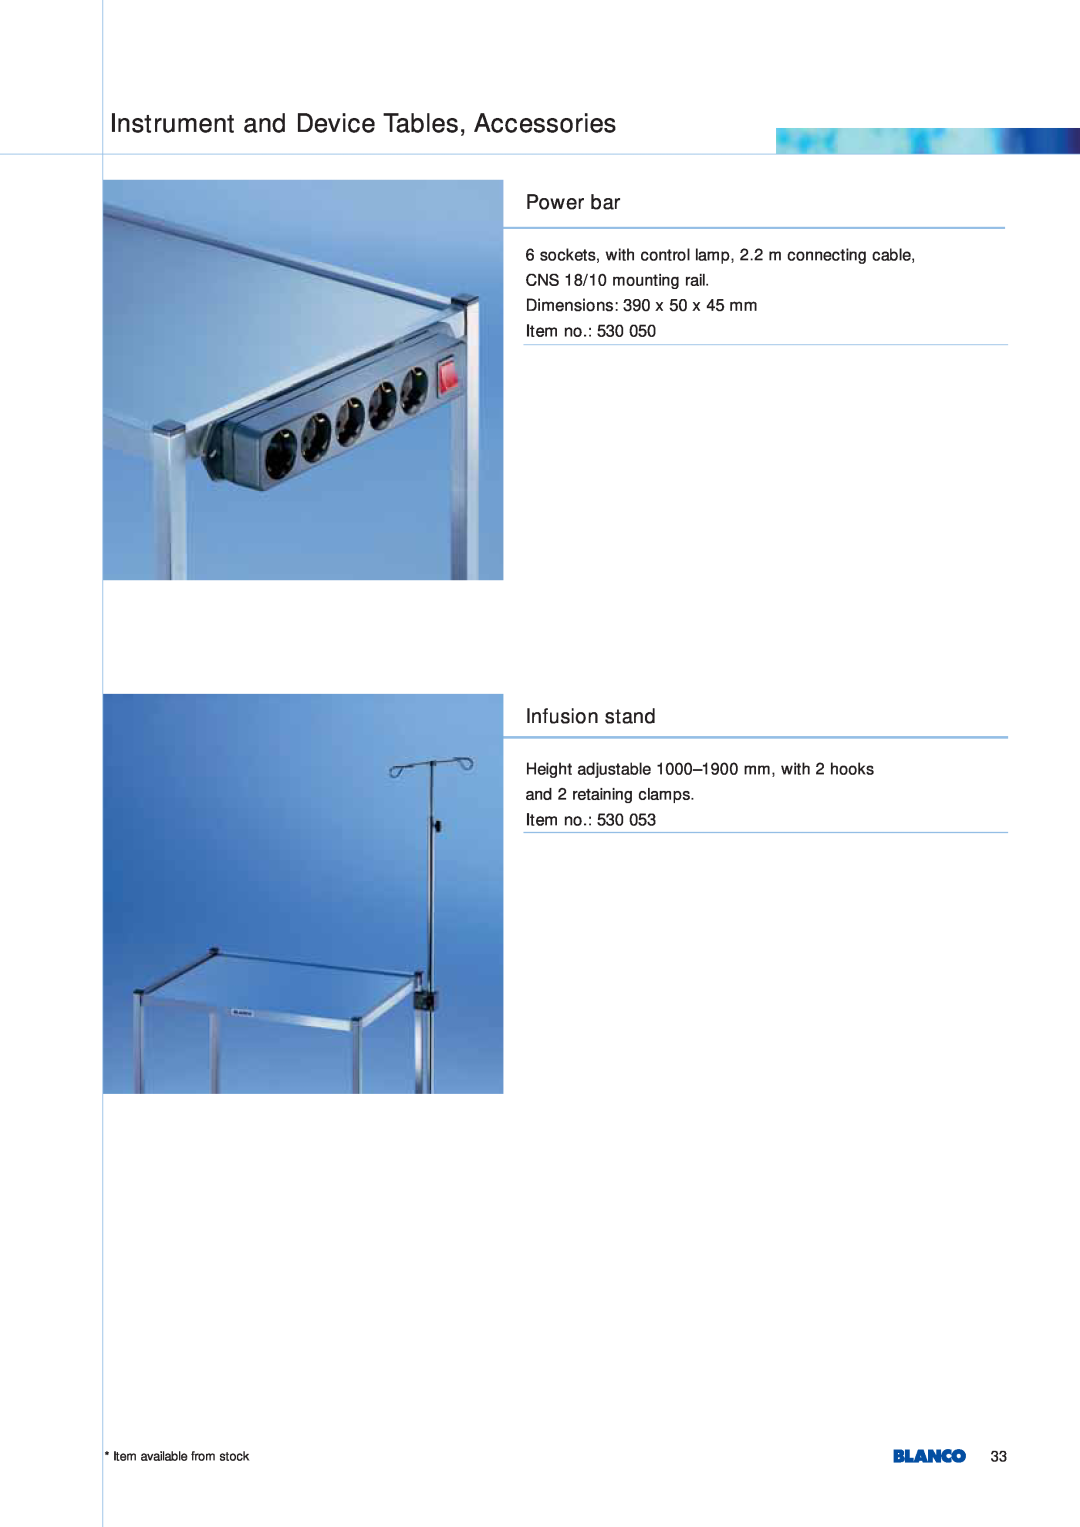 Blanco Tbingen Power bar, Instrument and Device Tables, Accessories, Infusion stand, Dimensions 390 x 50 x 45 mm Item no 